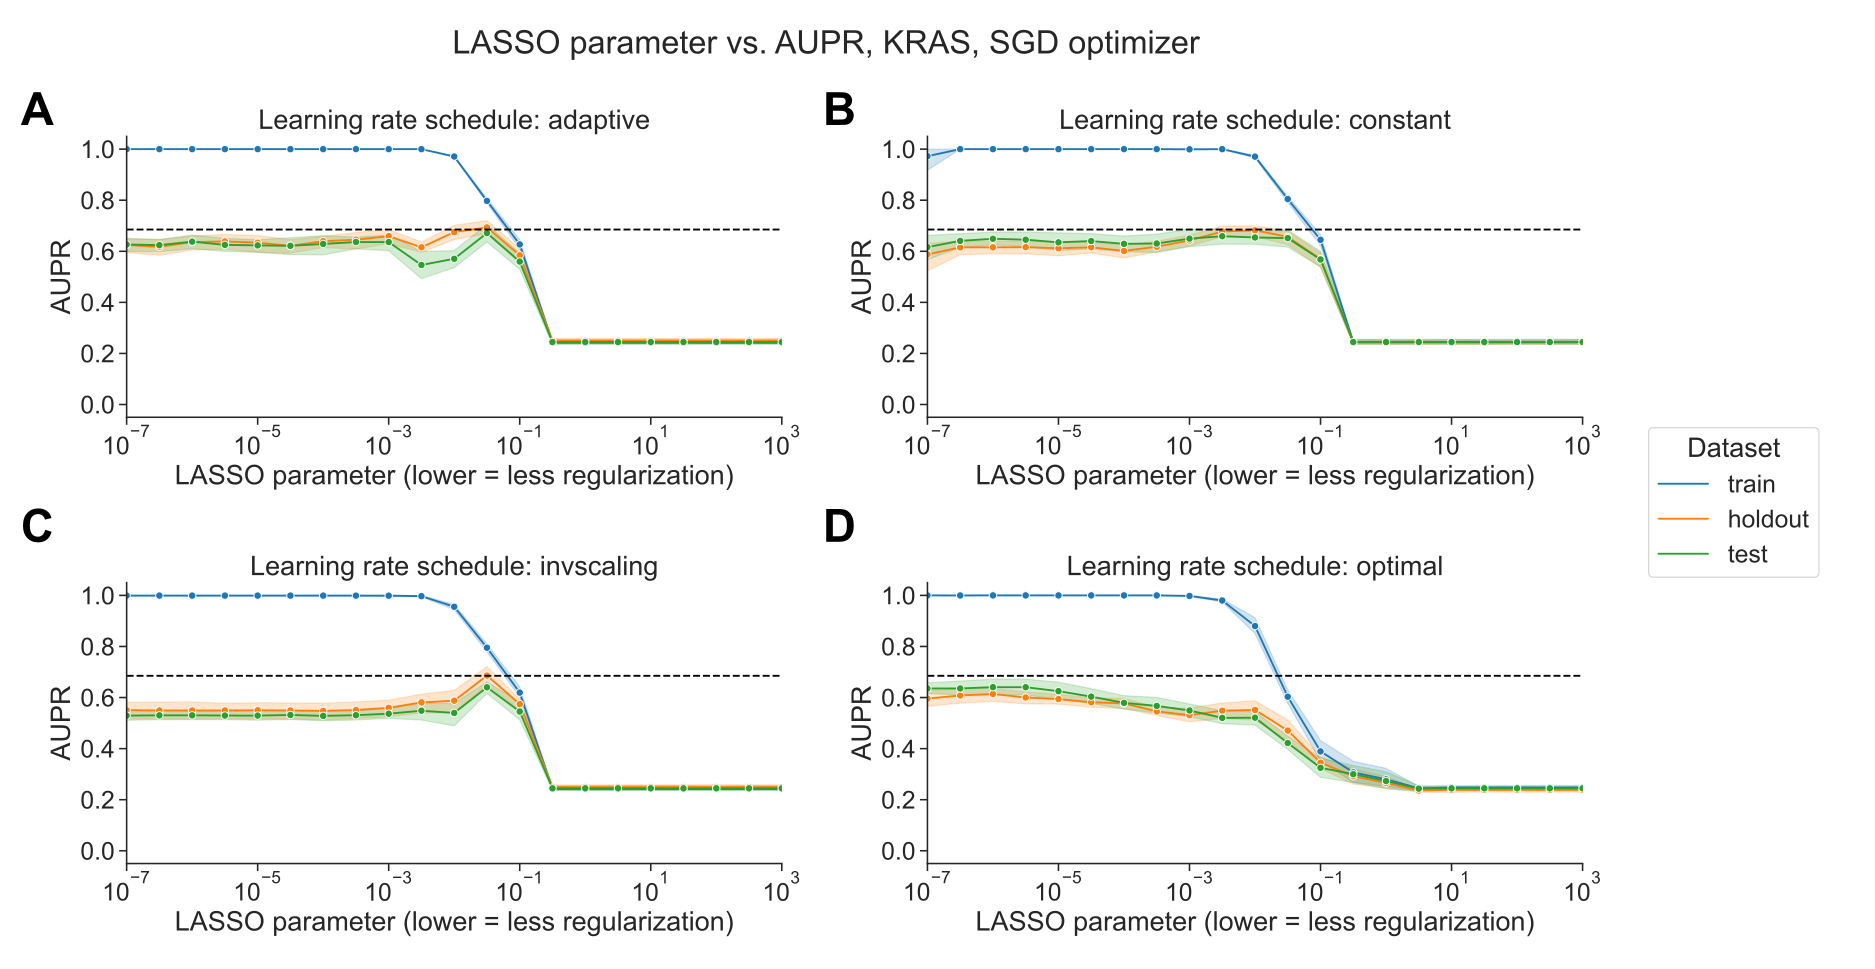 Figure 2: A. Performance vs. regularization parameter for KRAS mutation prediction, using SGD optimizer with adaptive learning rate scheduler. Dotted line indicates top performance value using liblinear, from Figure 1A. B. Performance vs. regularization parameter, using SGD optimizer with constant learning rate scheduler and a learning rate of 0.0005. C. Performance vs. regularization parameter, using SGD optimizer with inverse scaling learning rate scheduler. D. Performance vs. regularization parameter, using SGD optimizer with “optimal” learning rate scheduler.